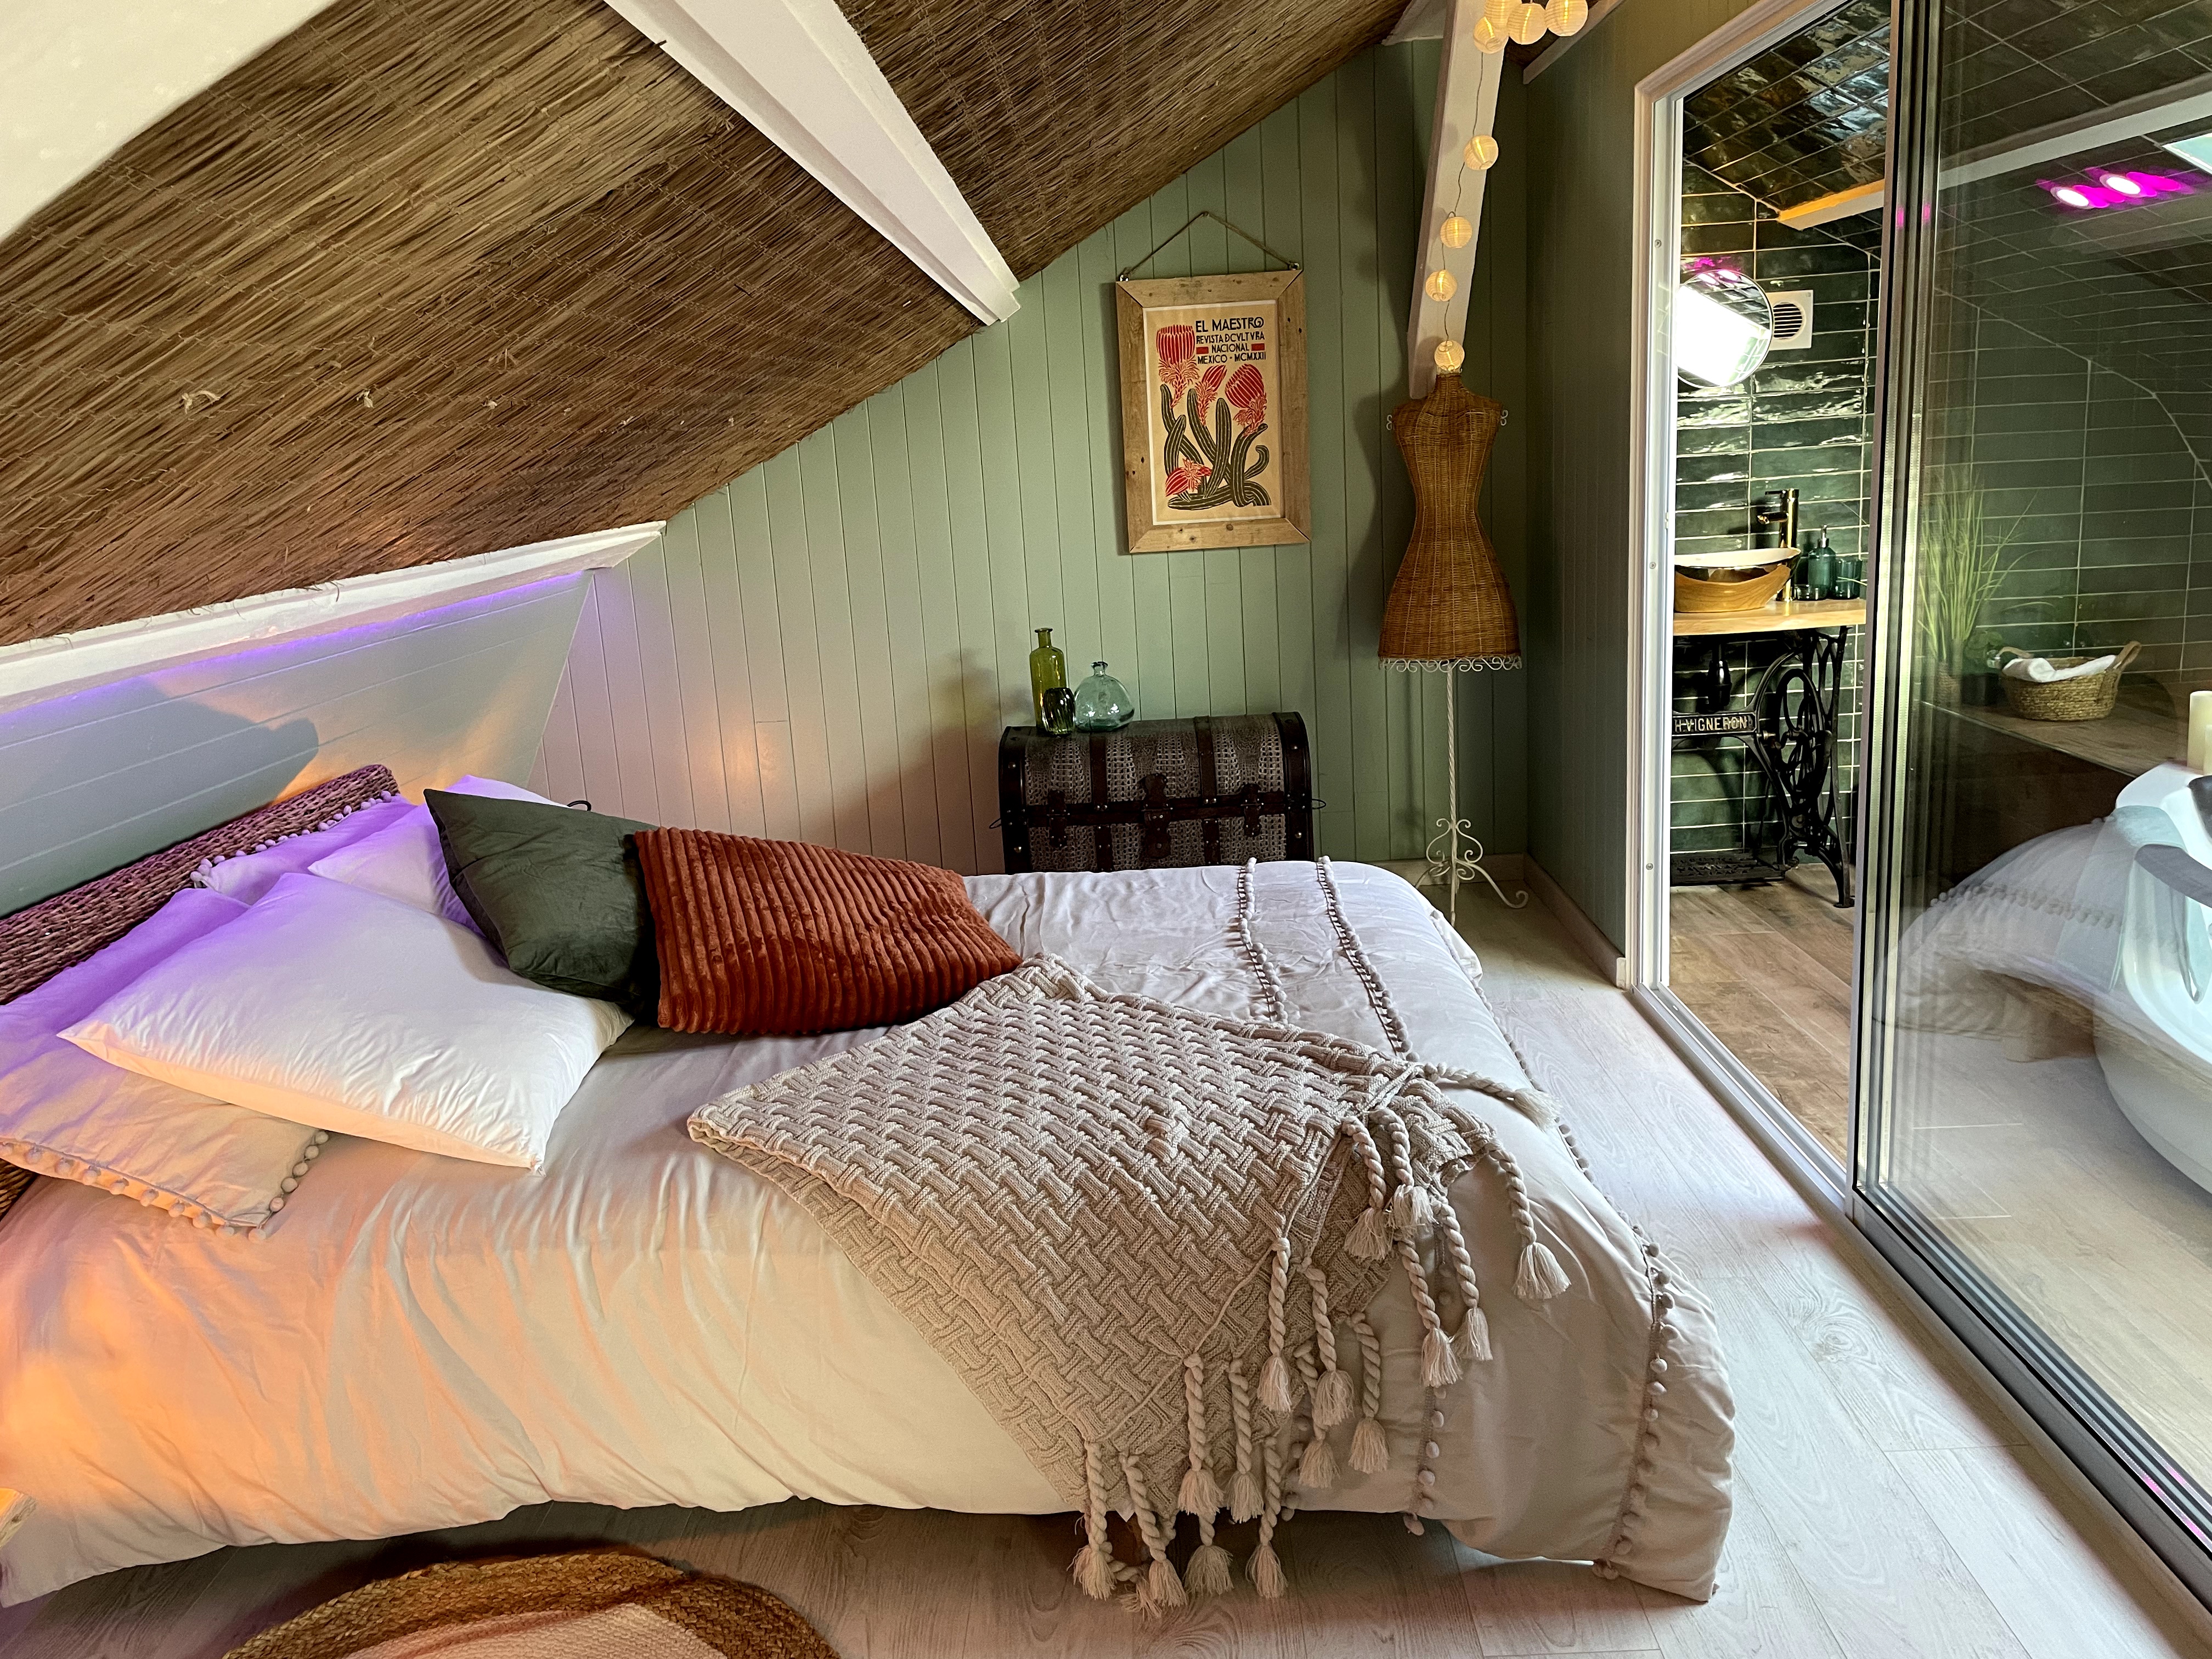 Attic bedroom in an Entire Home in a home located outside Paris. Room features tongue and groove walls painted green and a large bed with a scatter cushions and a woollen throw blanket.